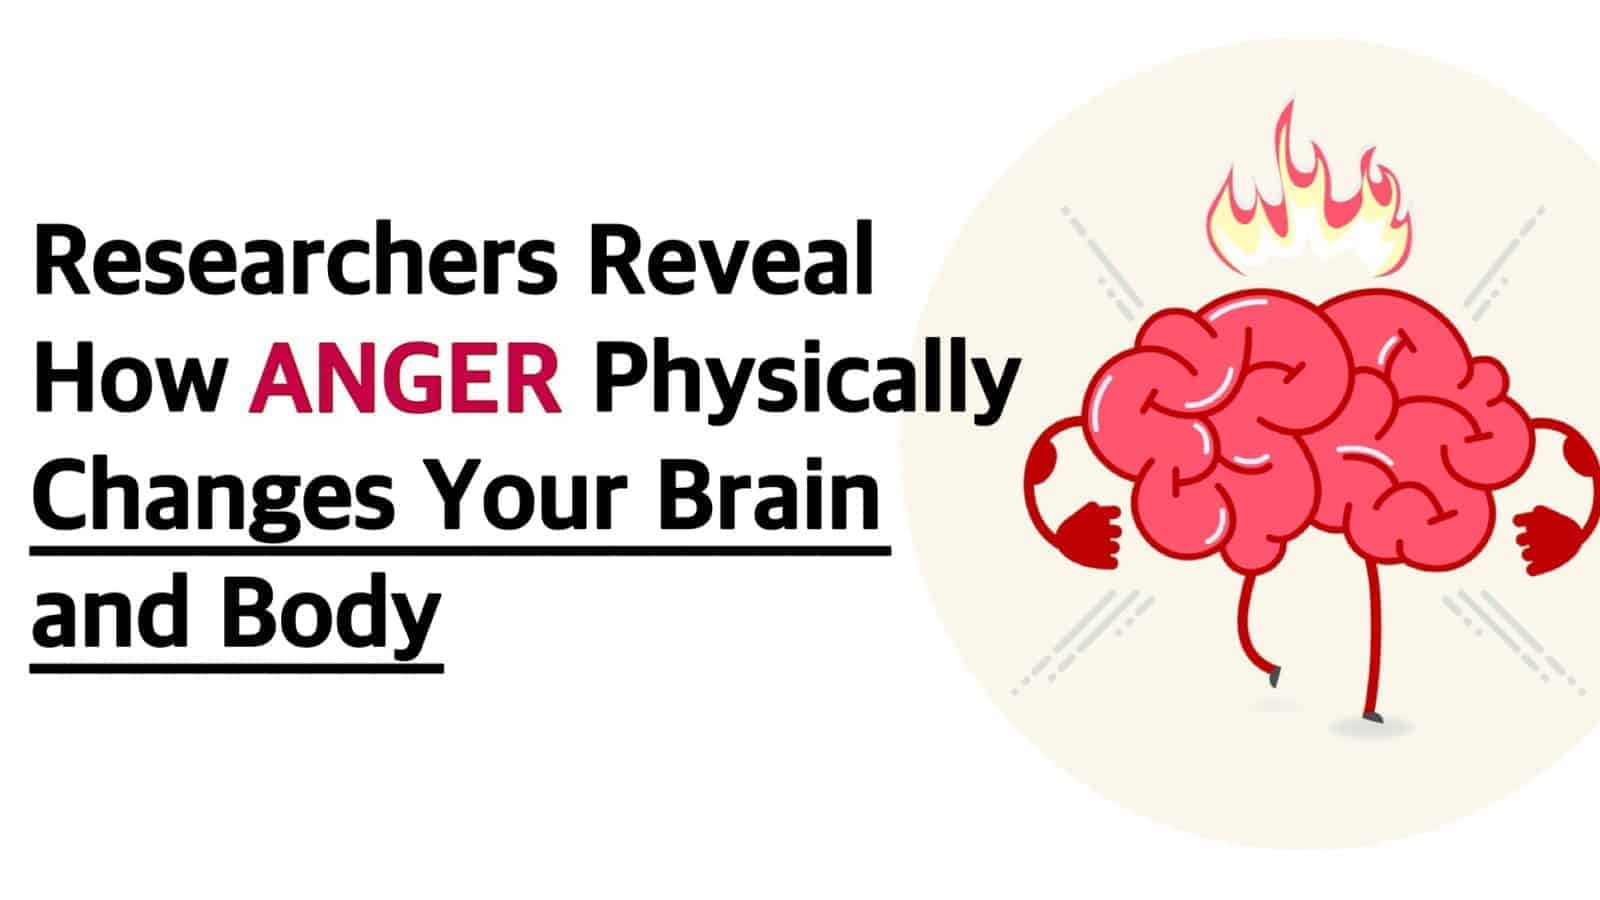 Researchers Reveal How Anger Physically Changes Your Brain and Body